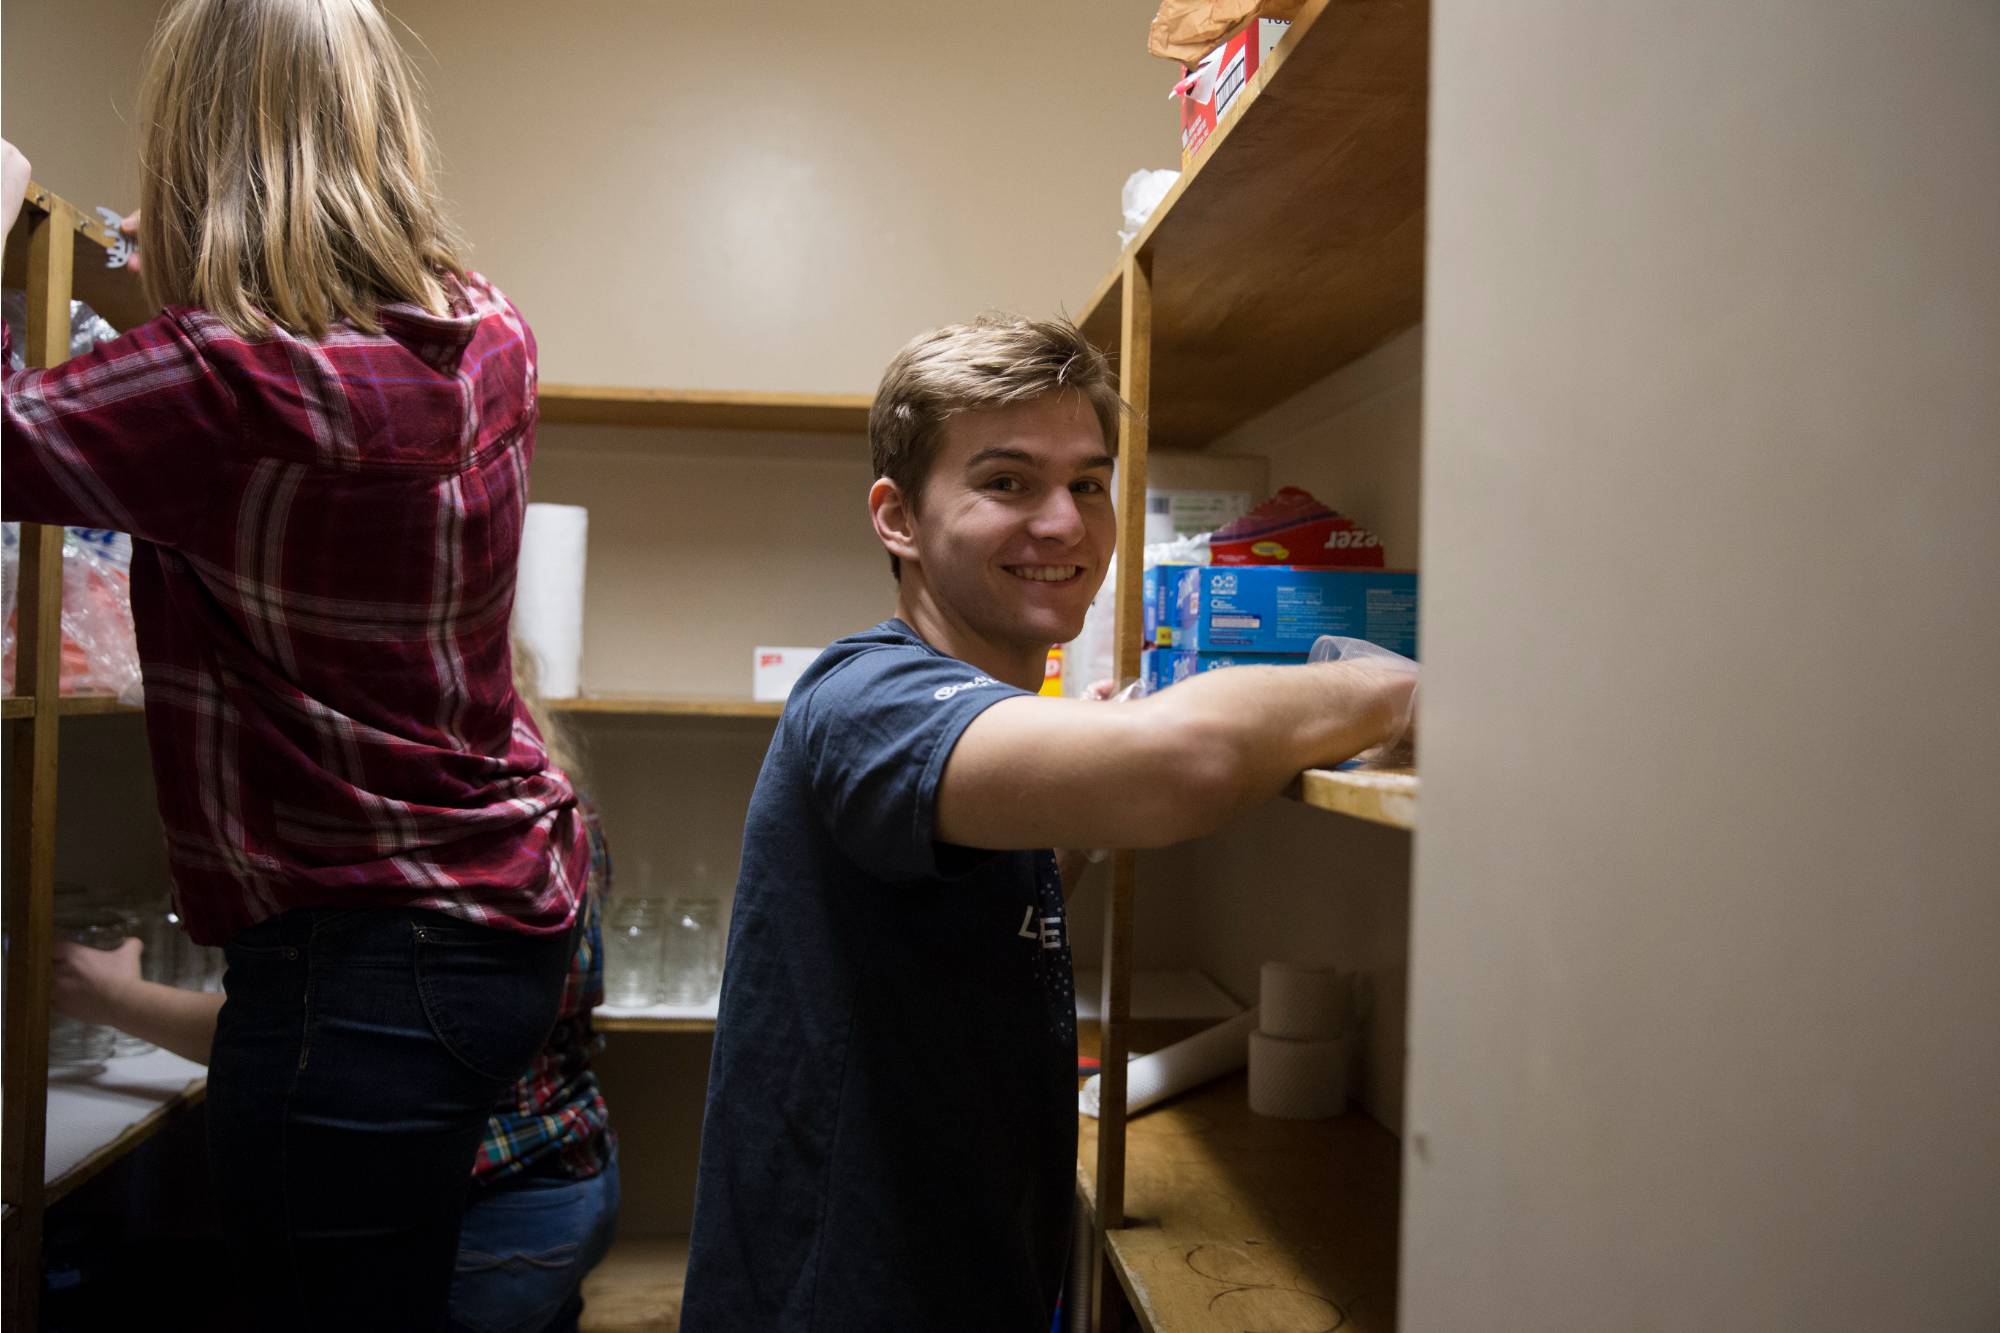 A student wiping down shelves